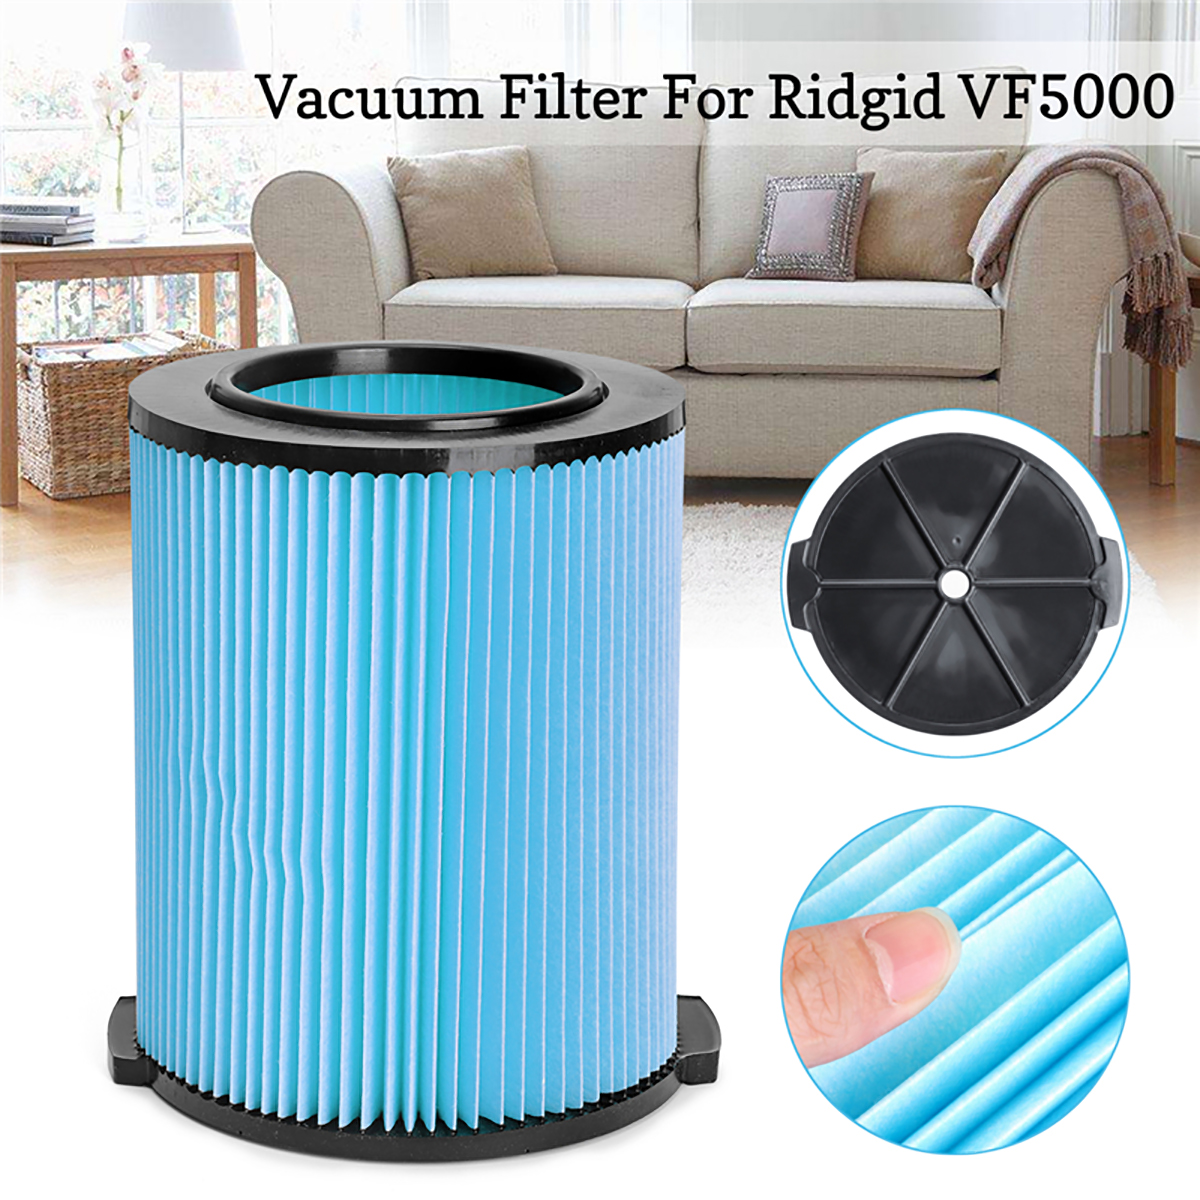 Wet-Dry-Vacuum-Cleaner-Filter-Element-Replacement-For-Ridgid-VF5000-6-20-Gallon-1372323-2